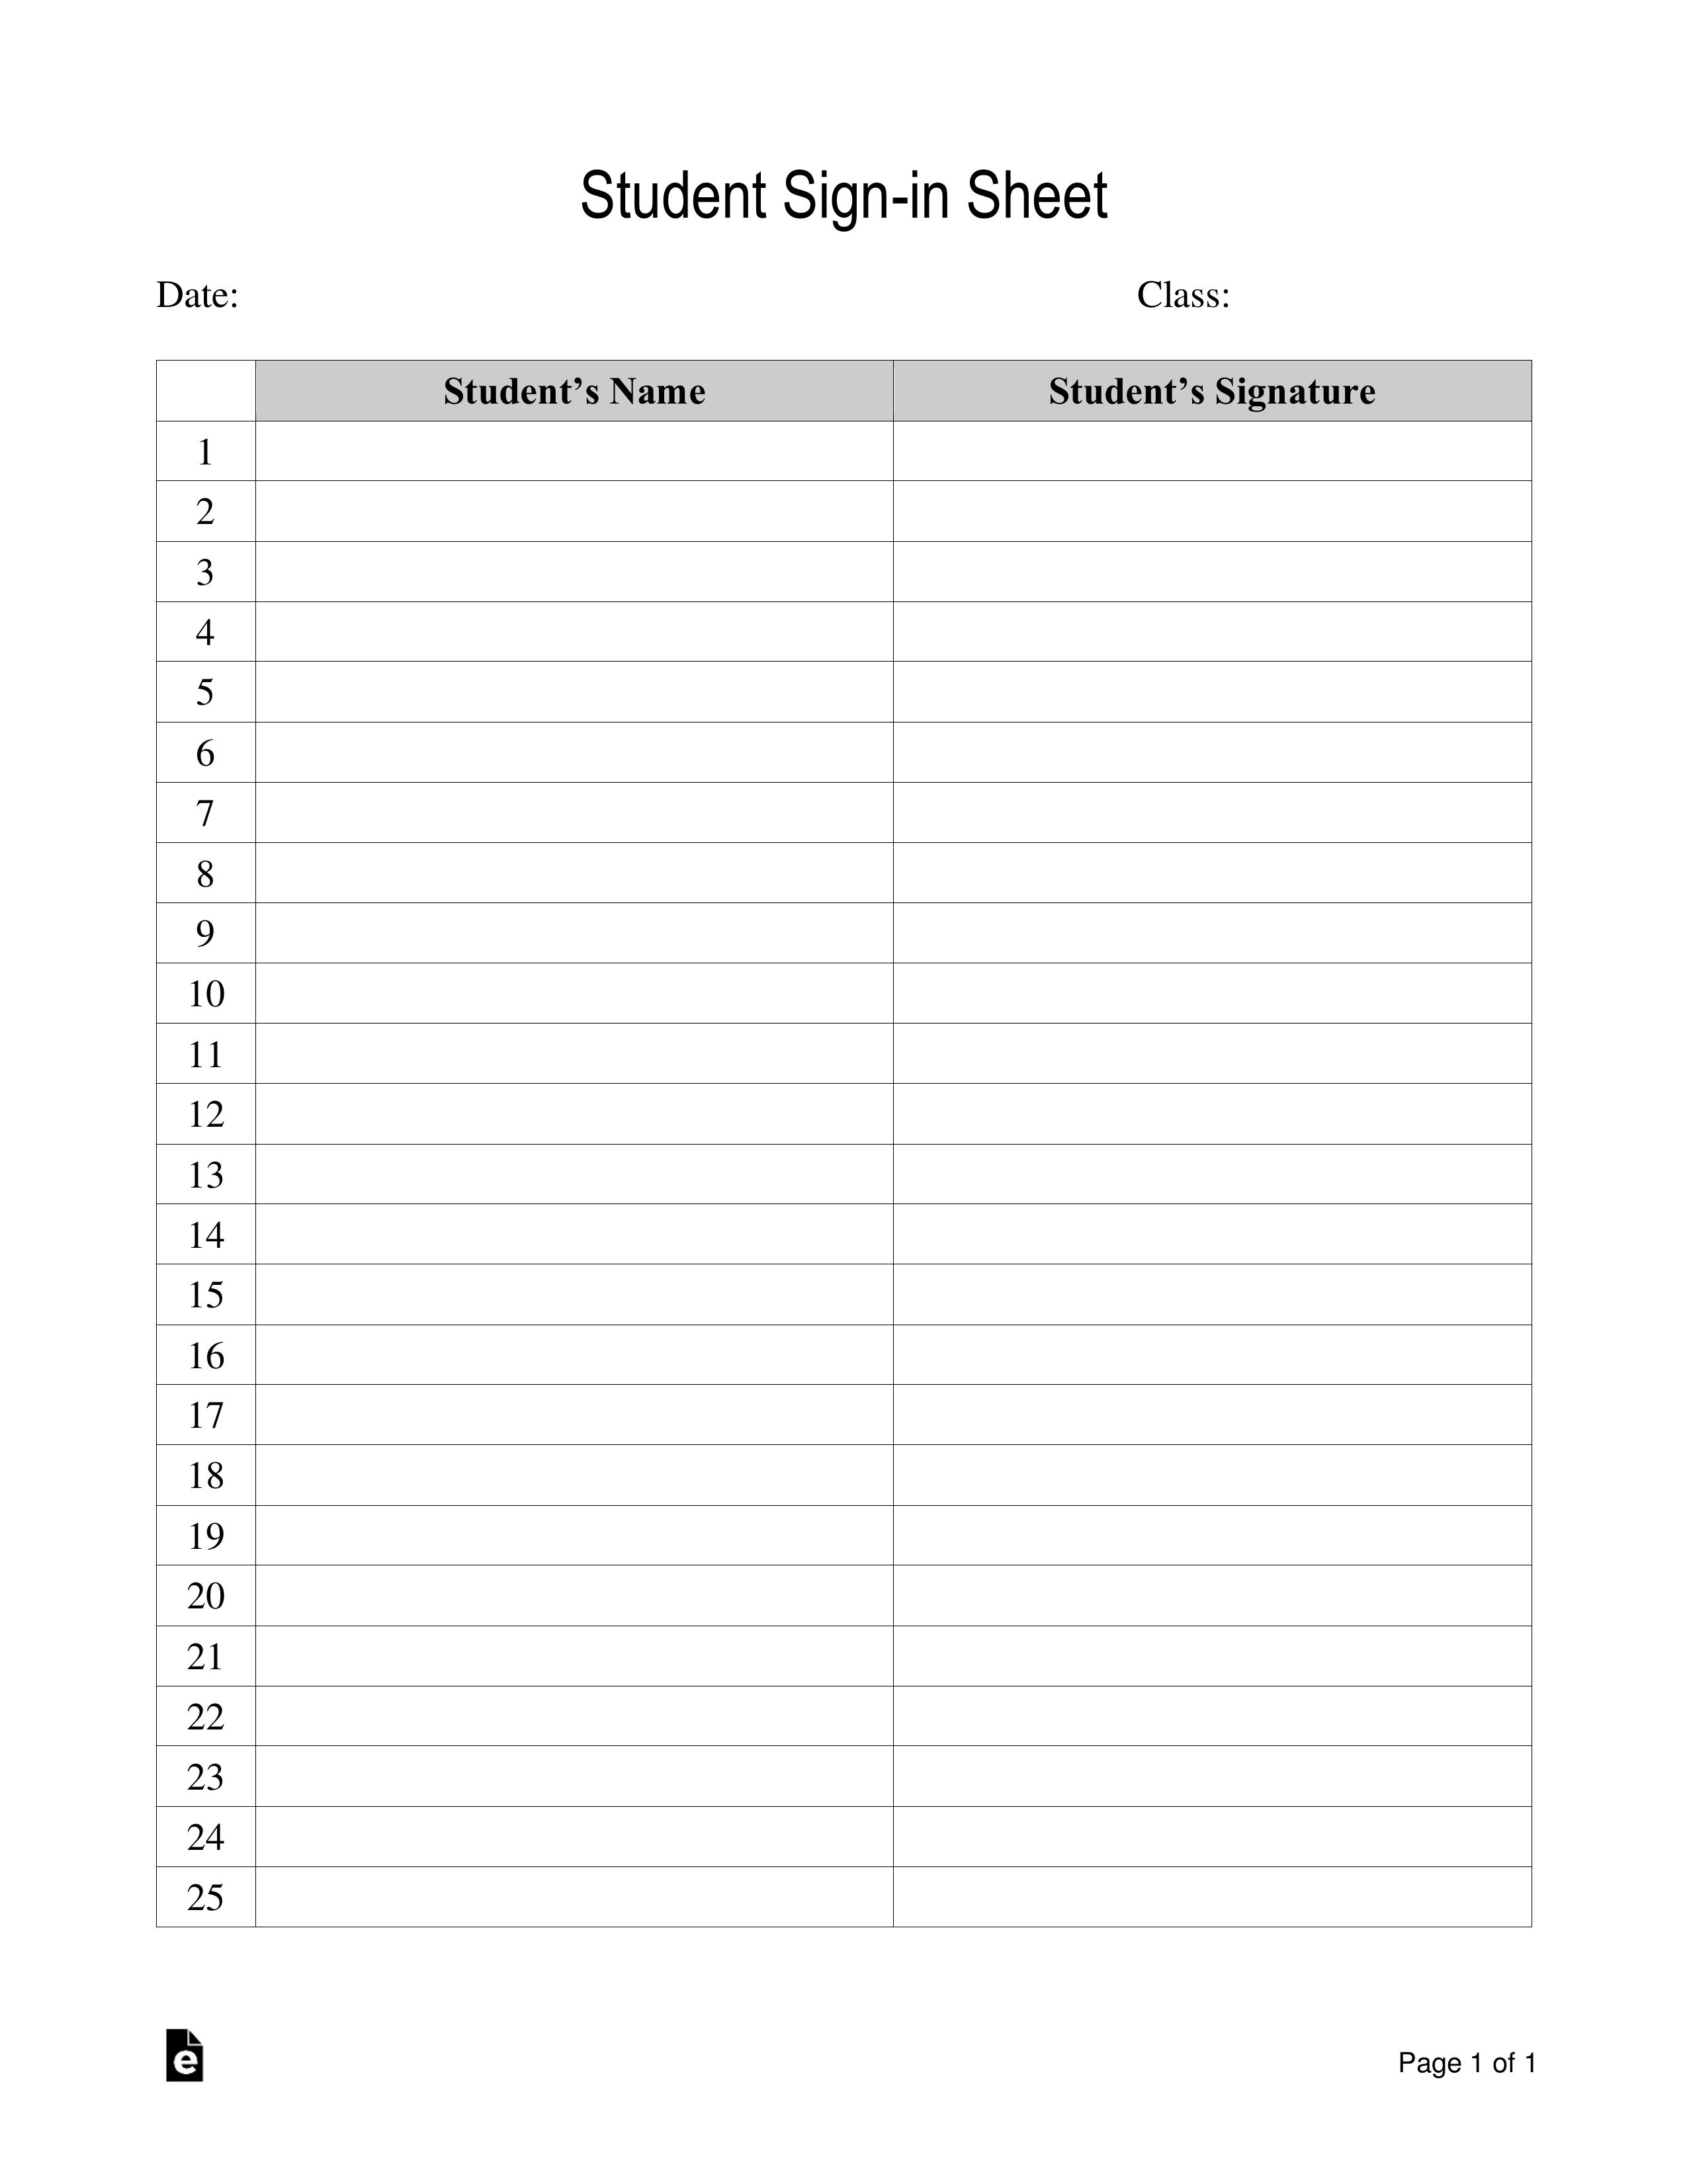 Free Student Sign-in Sheet Template - PDF | Word – eForms